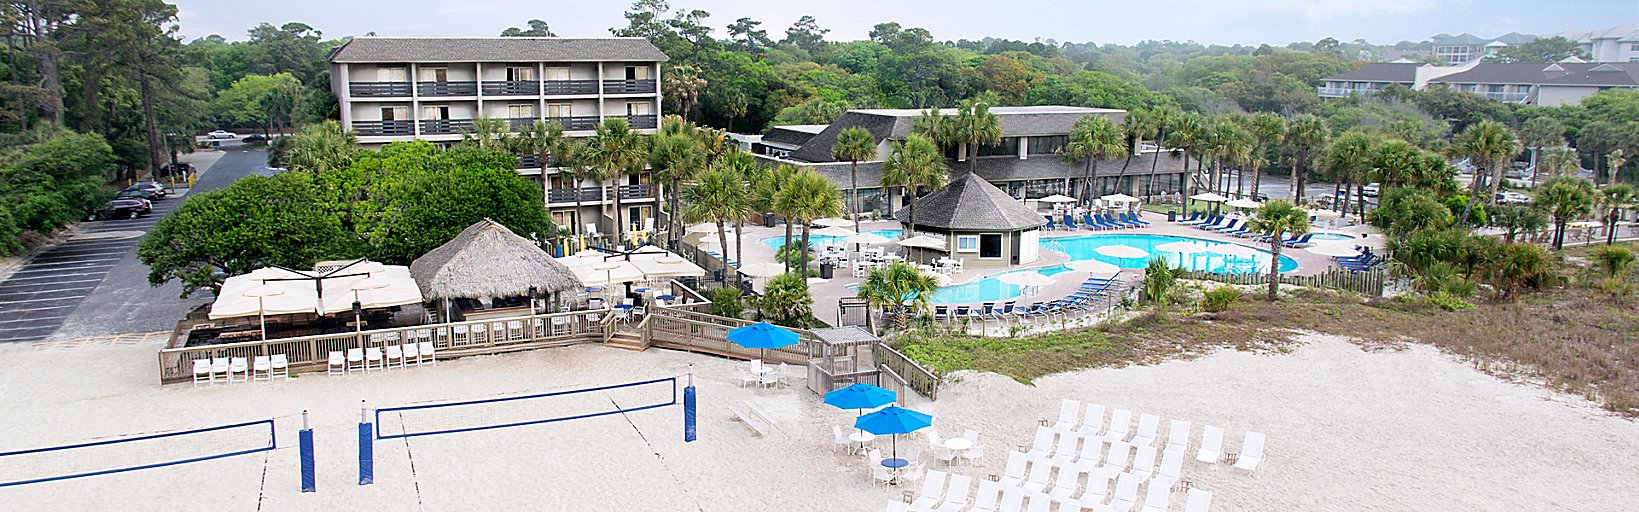 Free Timeshare Promotions In South Carolina